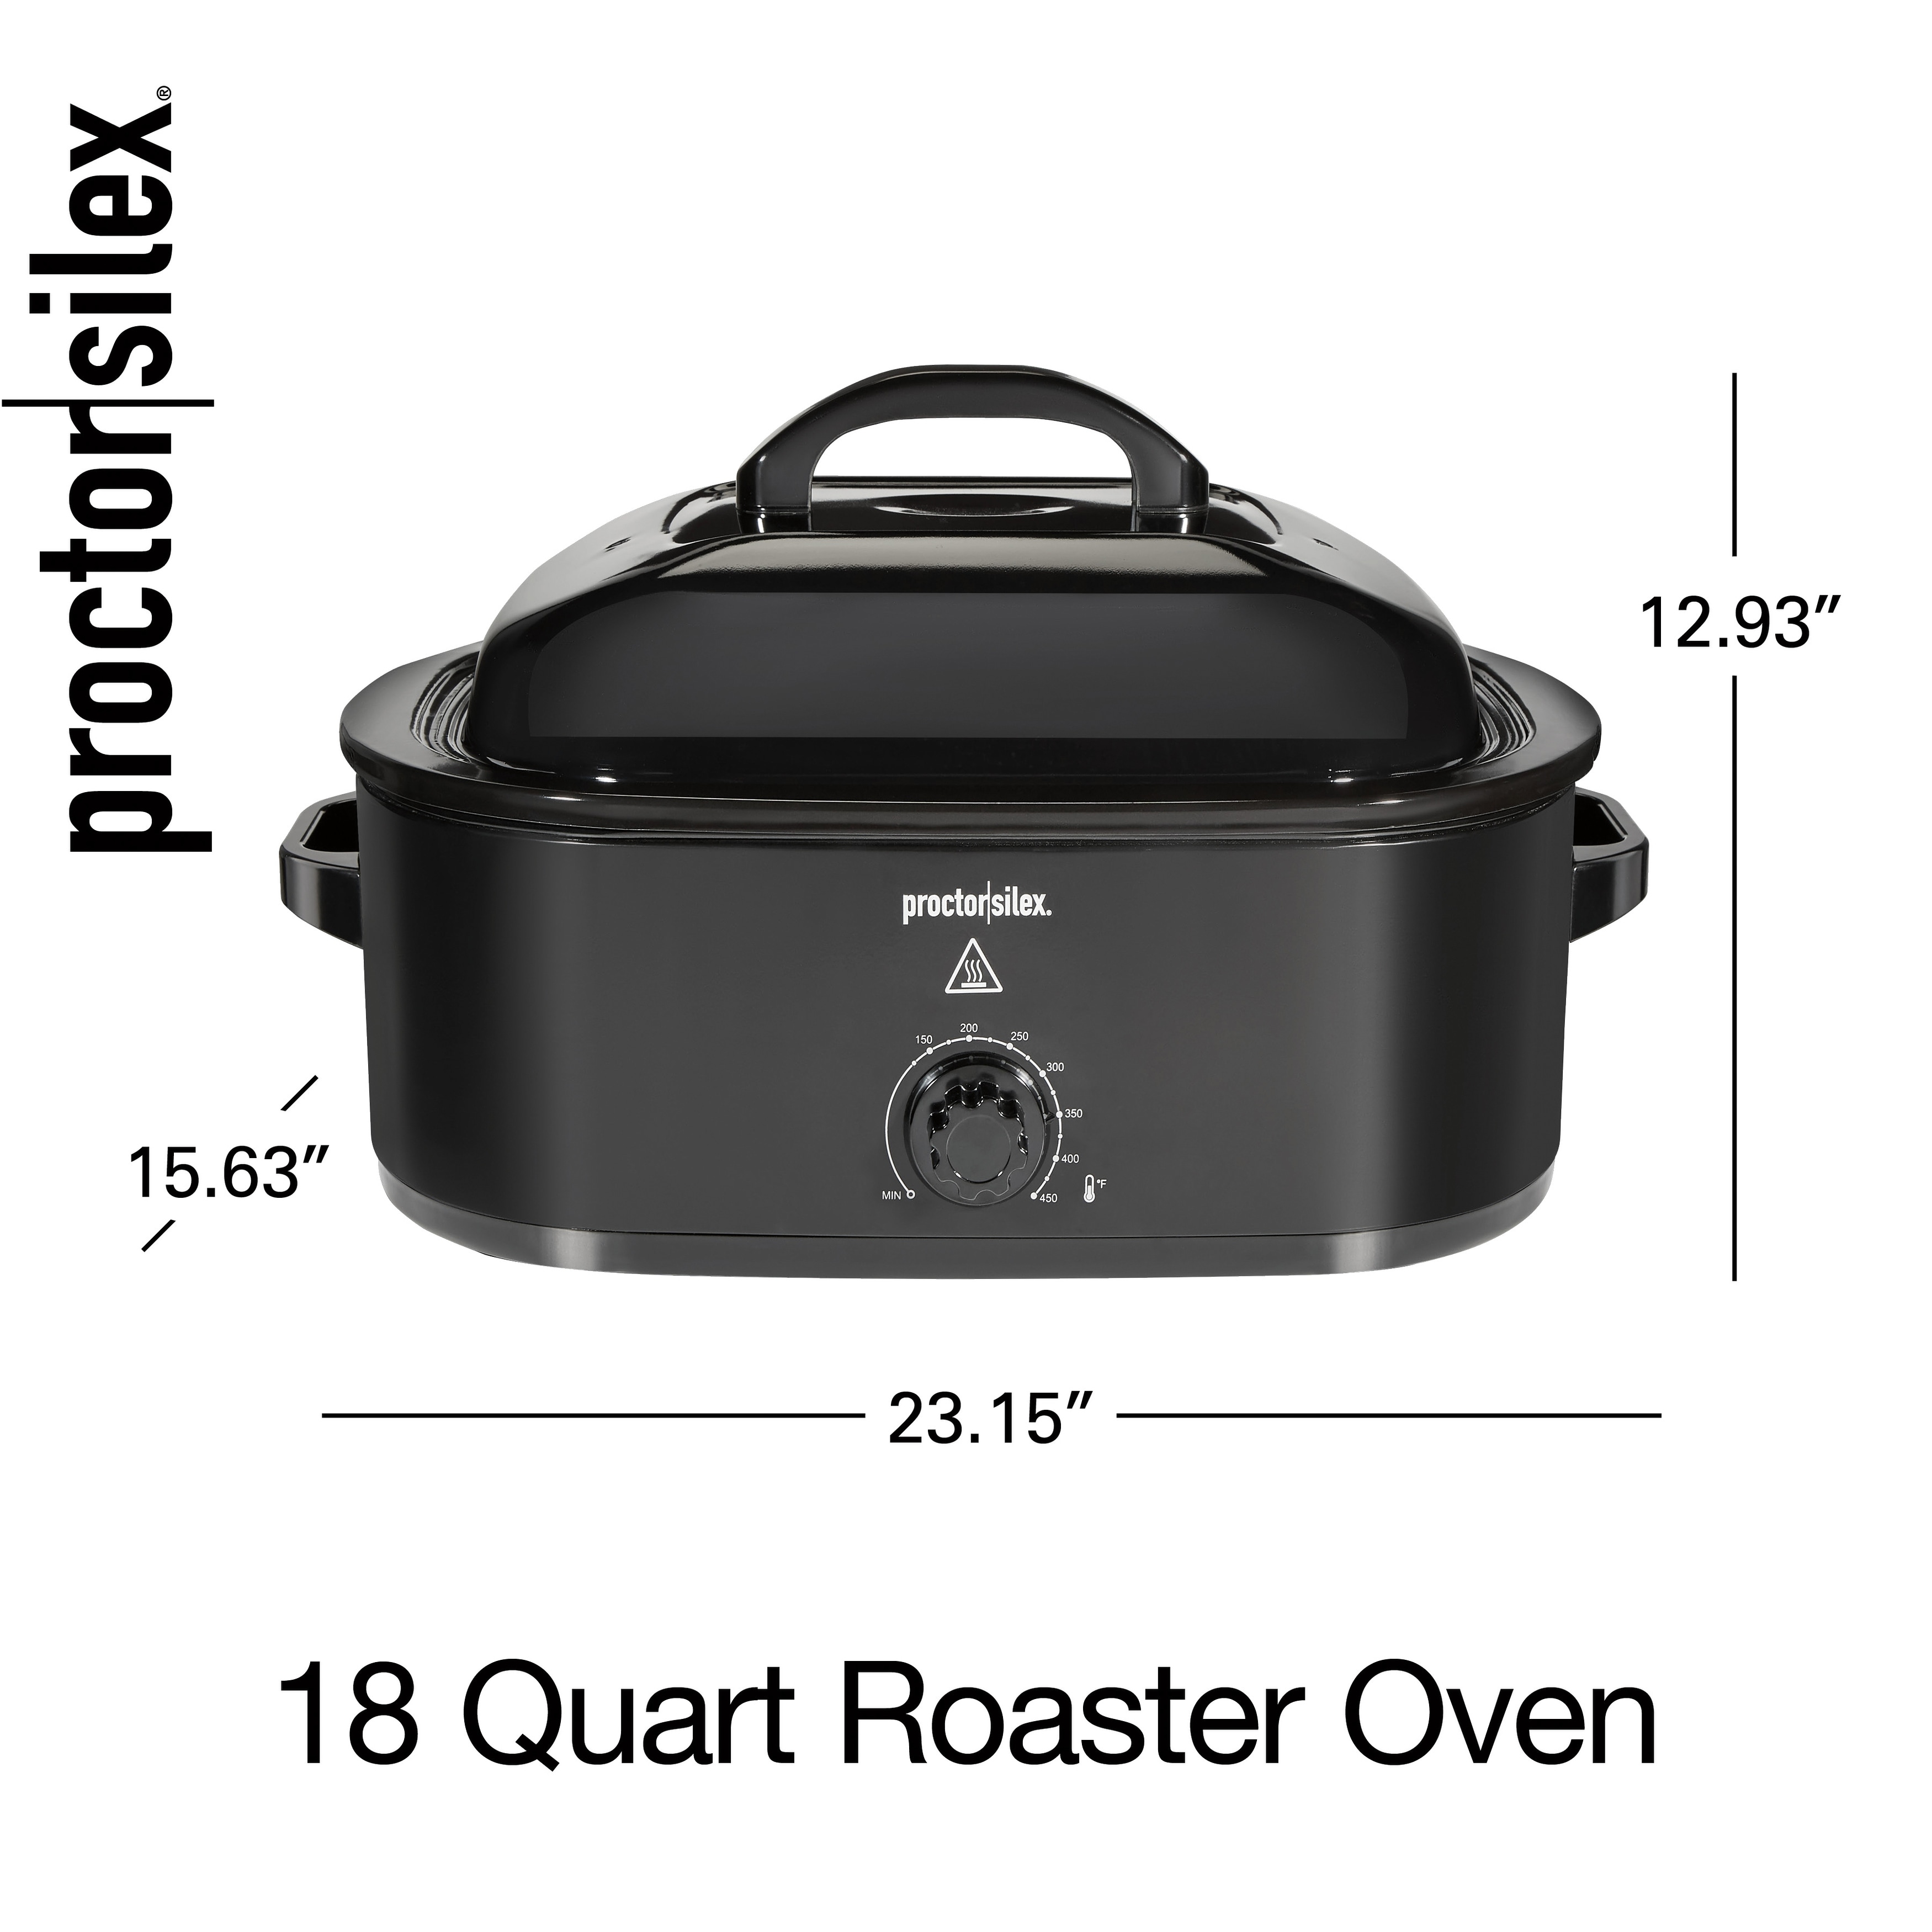 https://ak1.ostkcdn.com/images/products/is/images/direct/3b773821f222ffd735f95a7a1b710d1ed4437bff/Proctor-Silex-18-Quart-Electric-Roaster-Oven.jpg